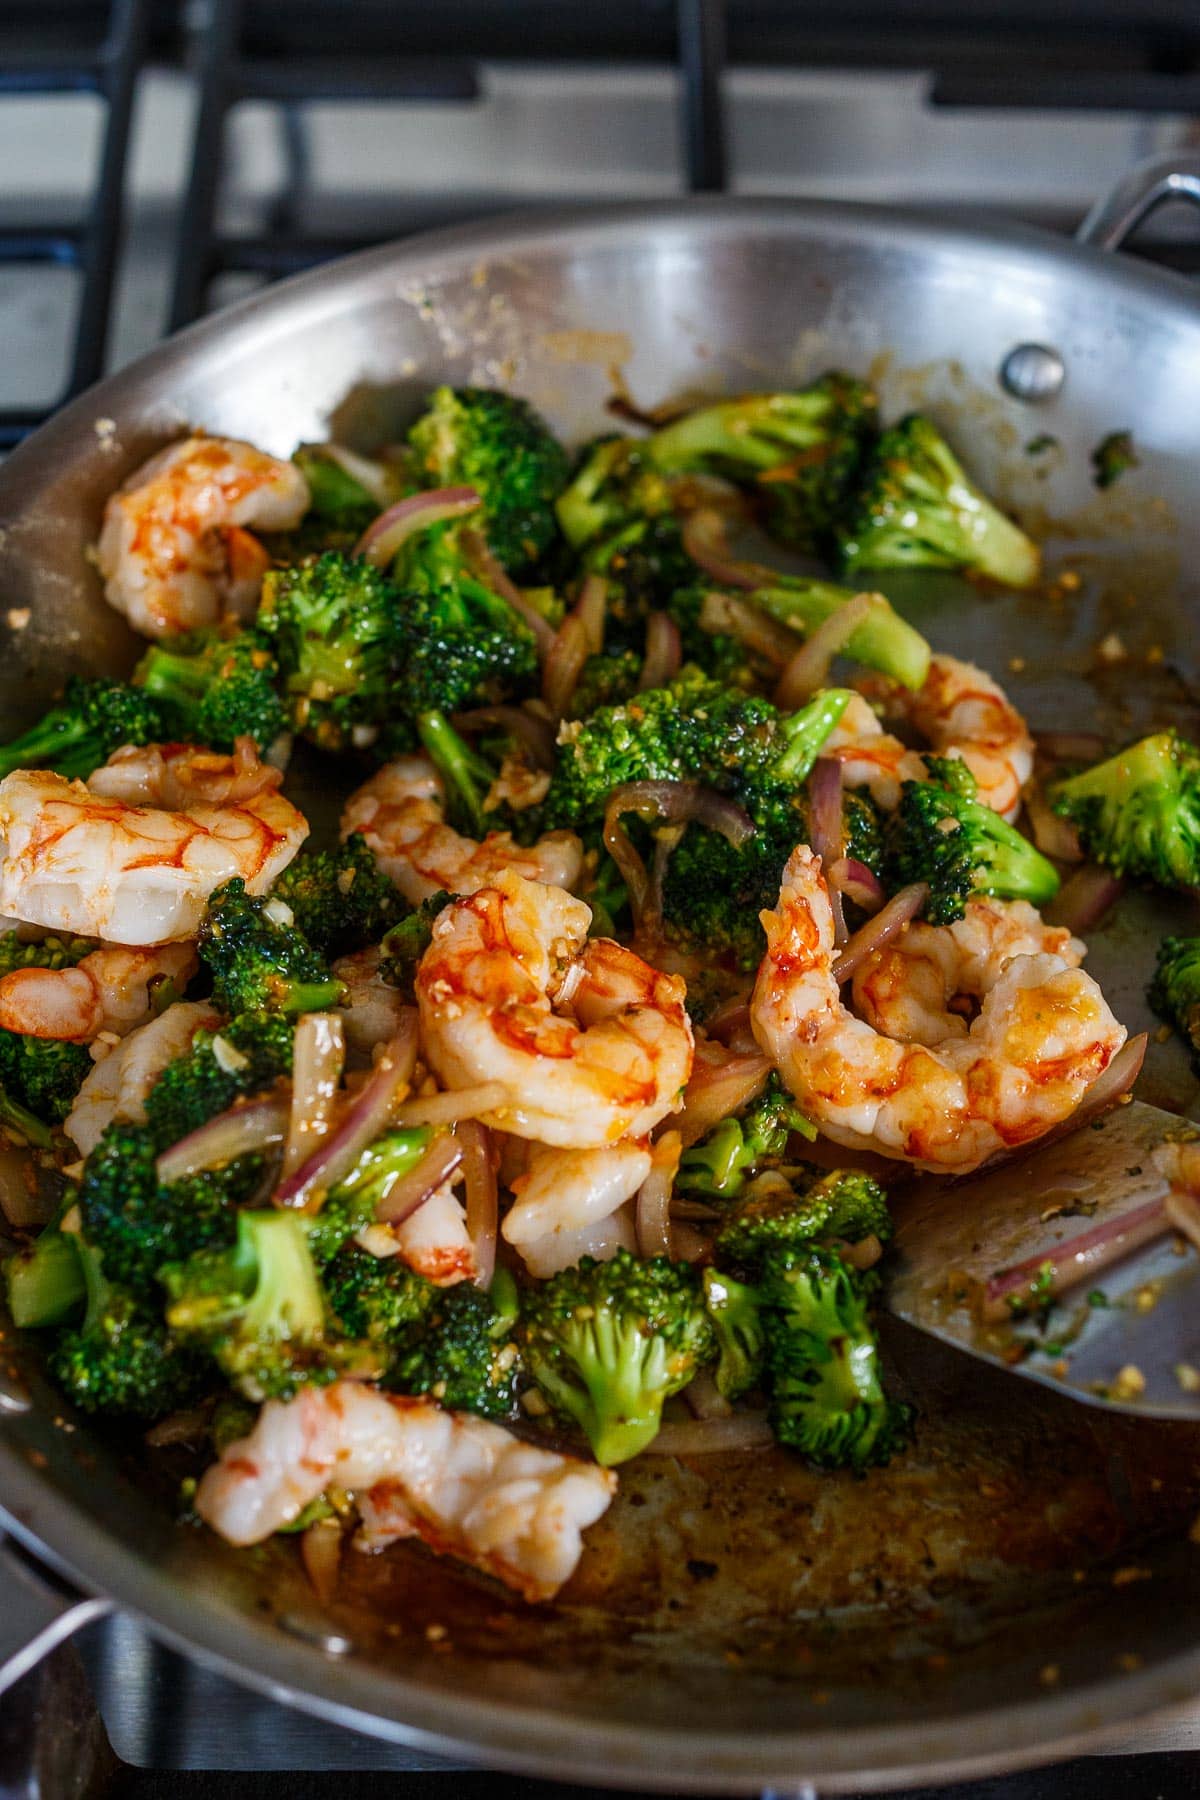 Mixing shrimp with broccoli and sauce.